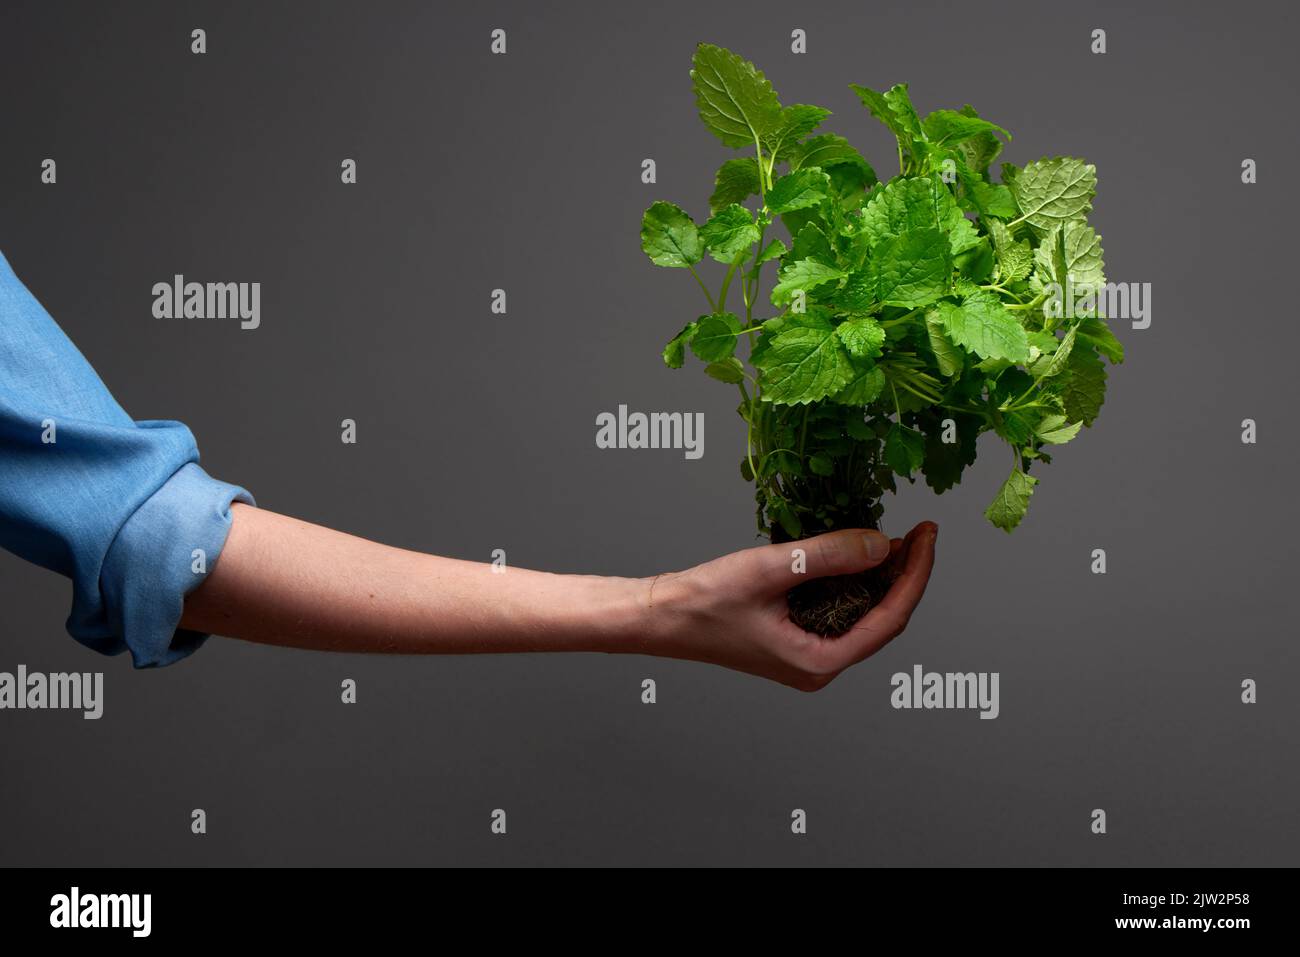 Woman’s hand in blue denim shirt holds bush of green lemon balm with roots in ground on dark grey background Stock Photo